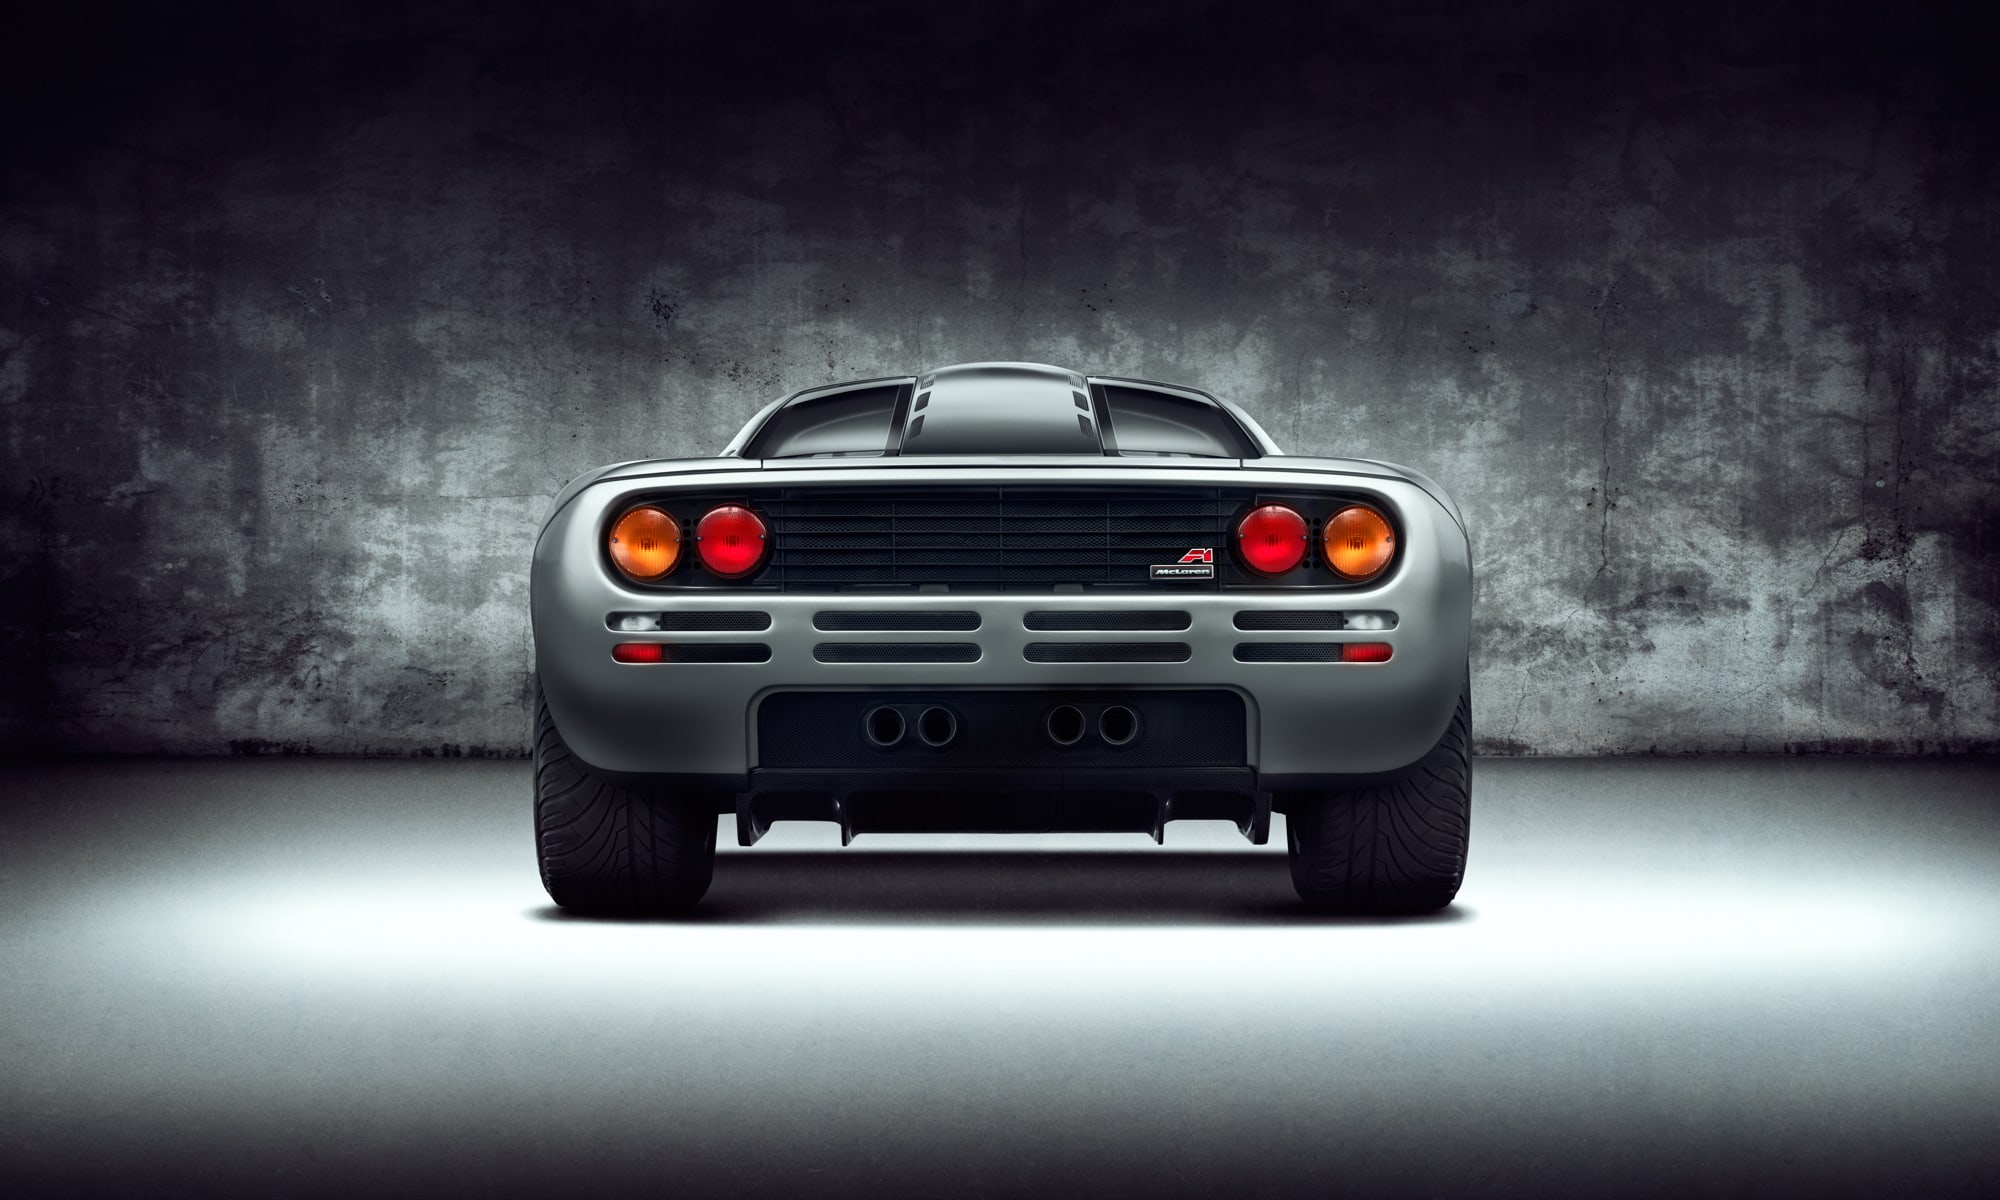 McLaren F1 photographed in studio by Automotive Photographer Blair Bunting